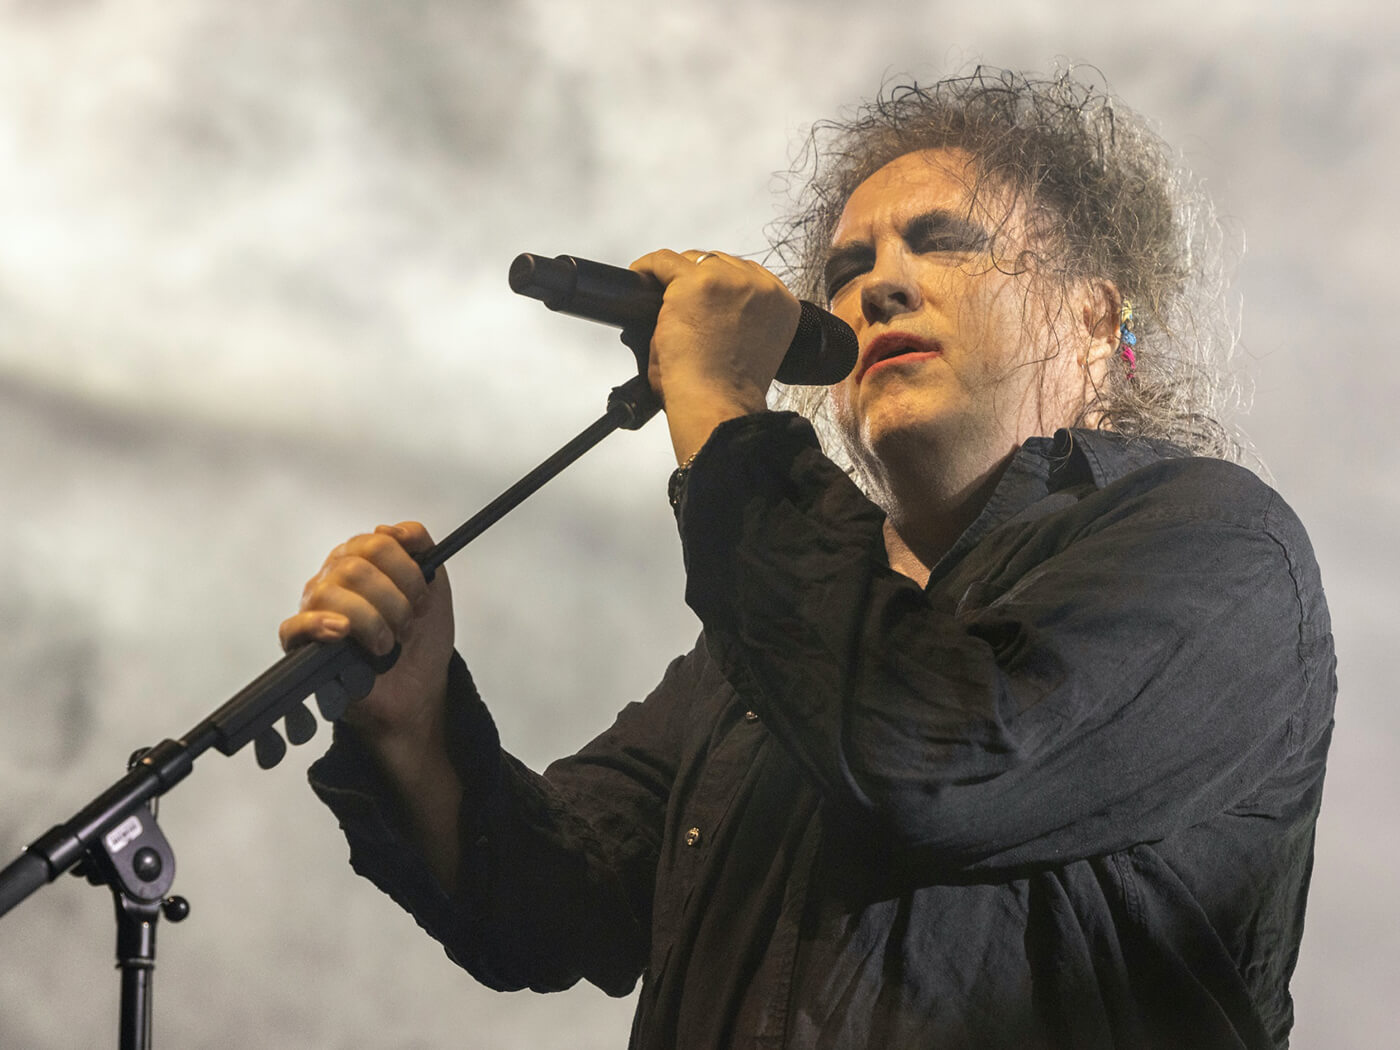 Watch The Cure debut new song “And Nothing Is Forever”